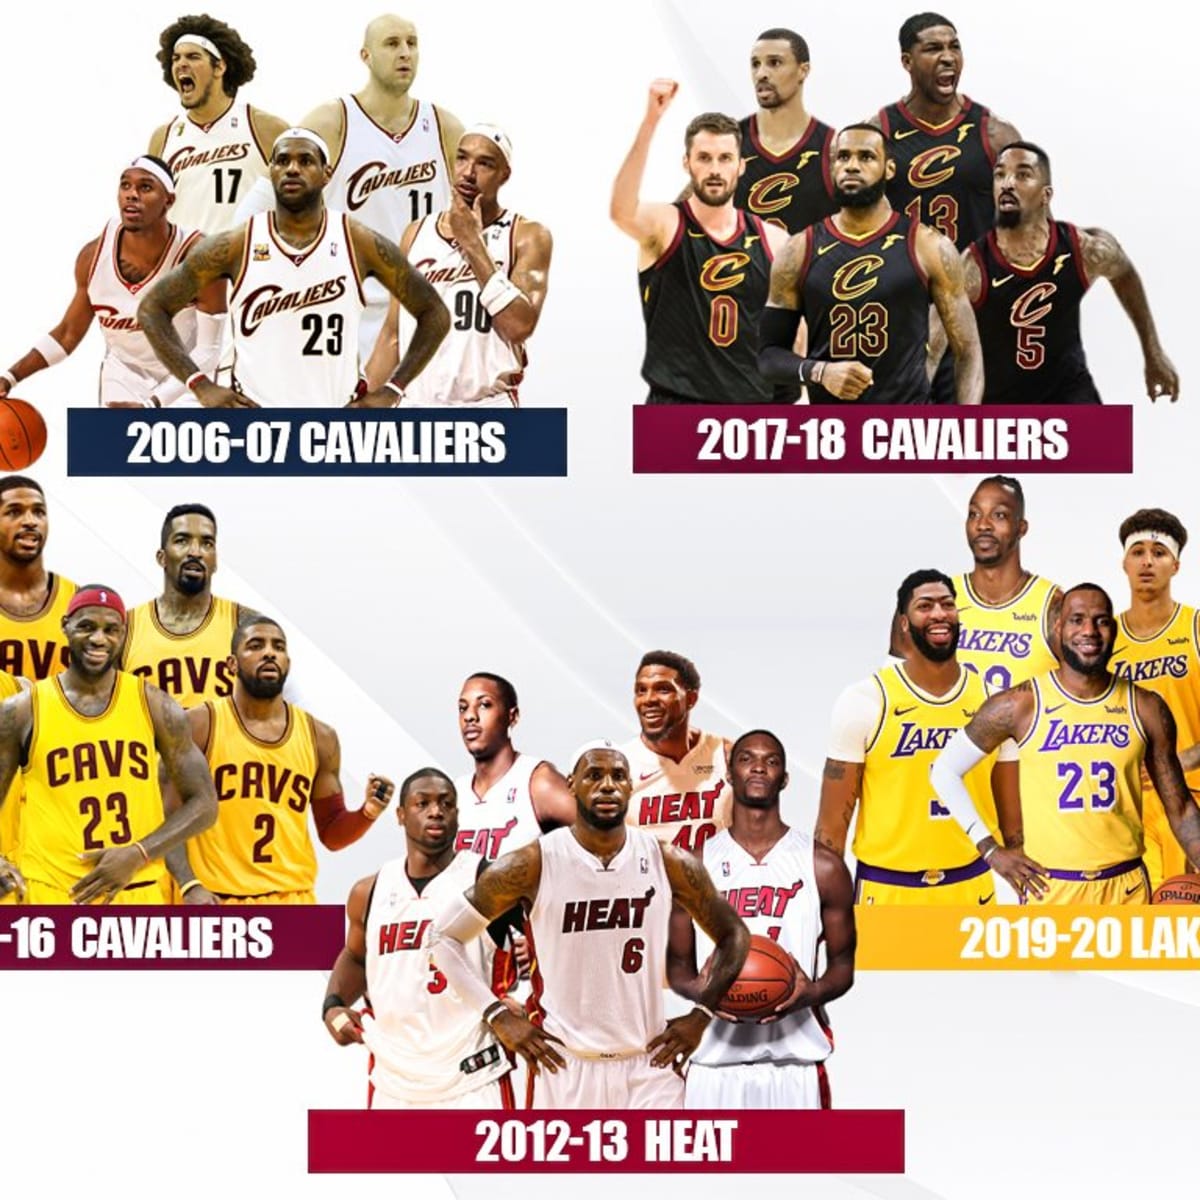 LeBron James '50 times better' than in 2007 NBA Finals